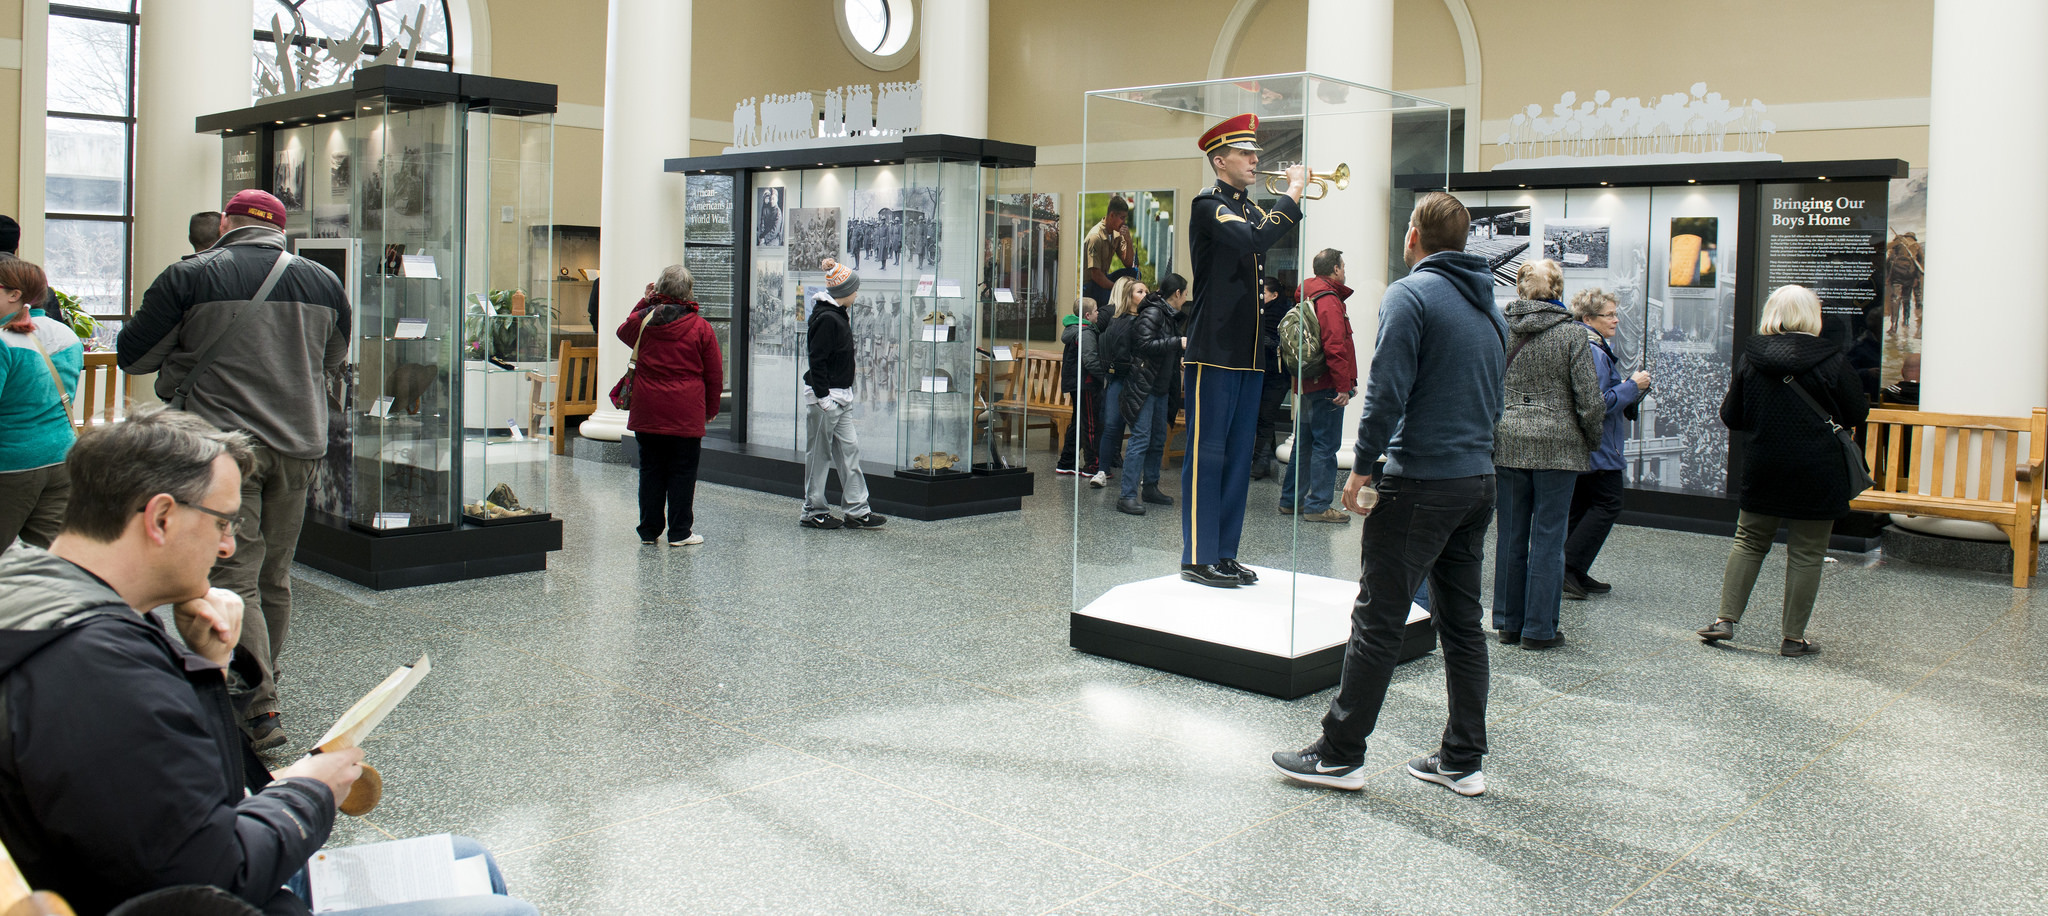 Visitors stand in front of the exhibits to read and view the photos.